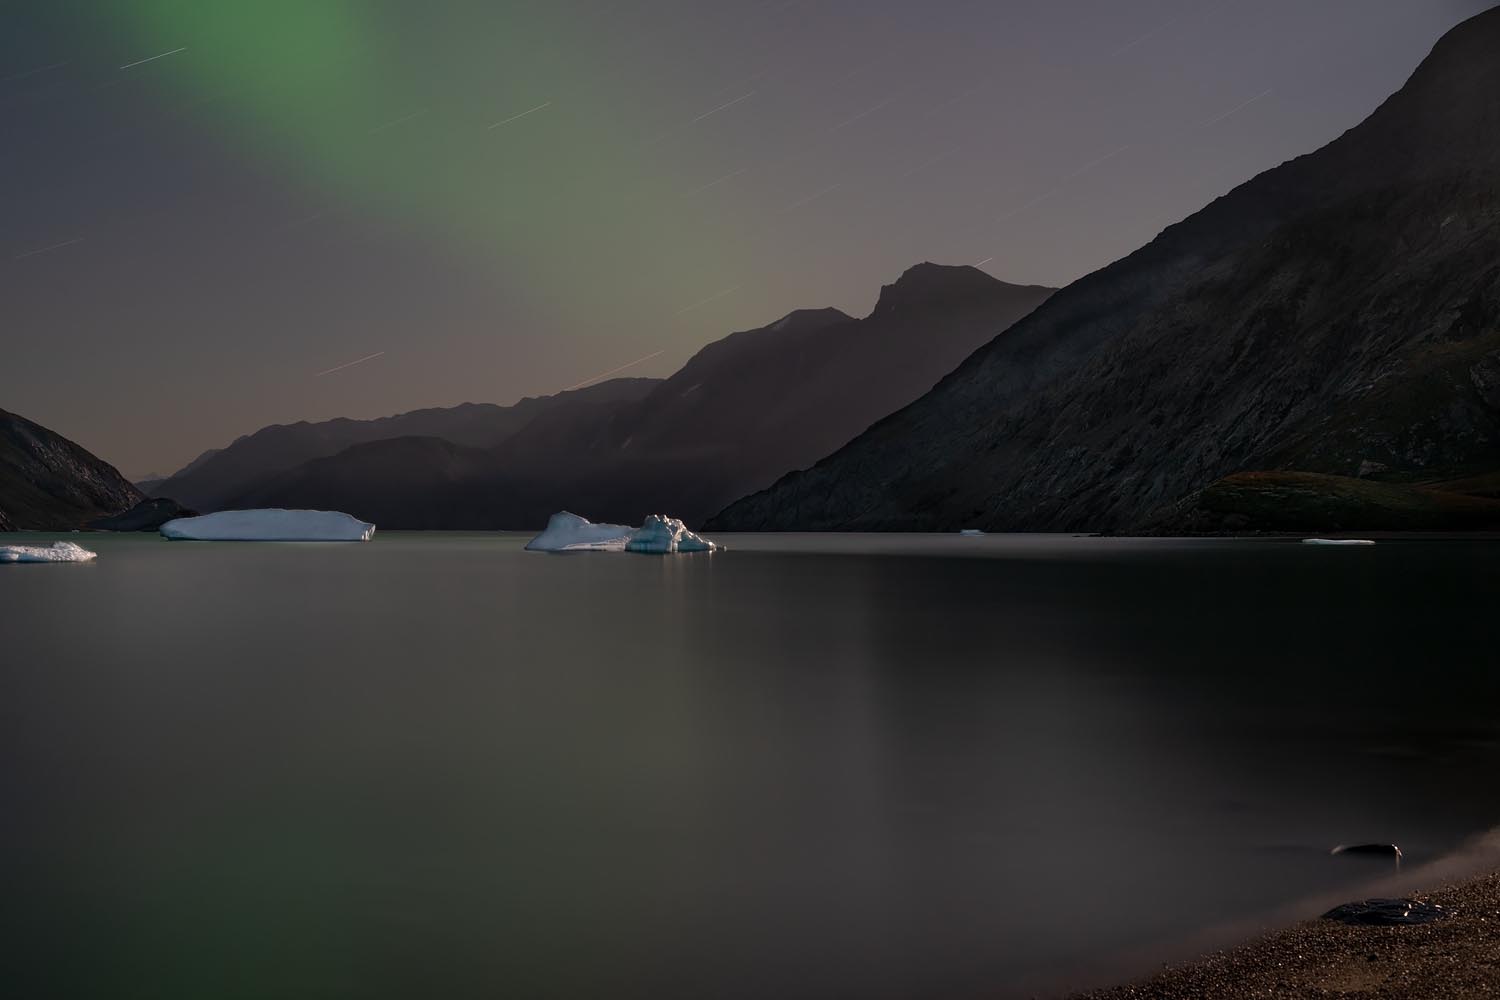 Shadow and Light: New Night Landscape Photographs of Greenland